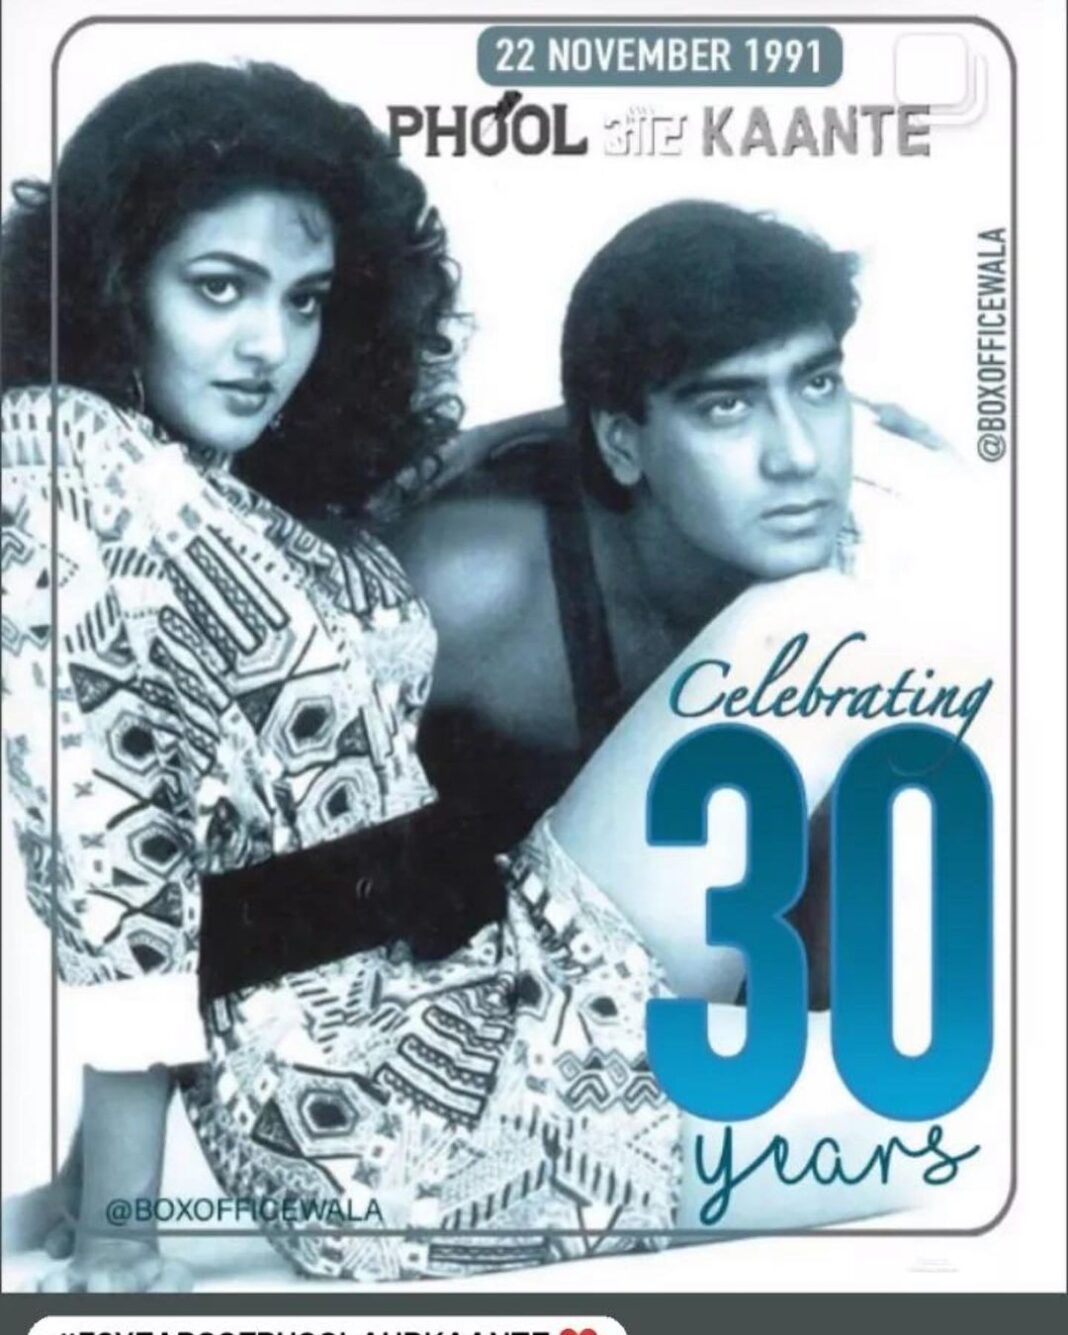 Madhoo Instagram - 30 years ago 22nov 1991 I came out as an actor, #mydestiny #gratitude